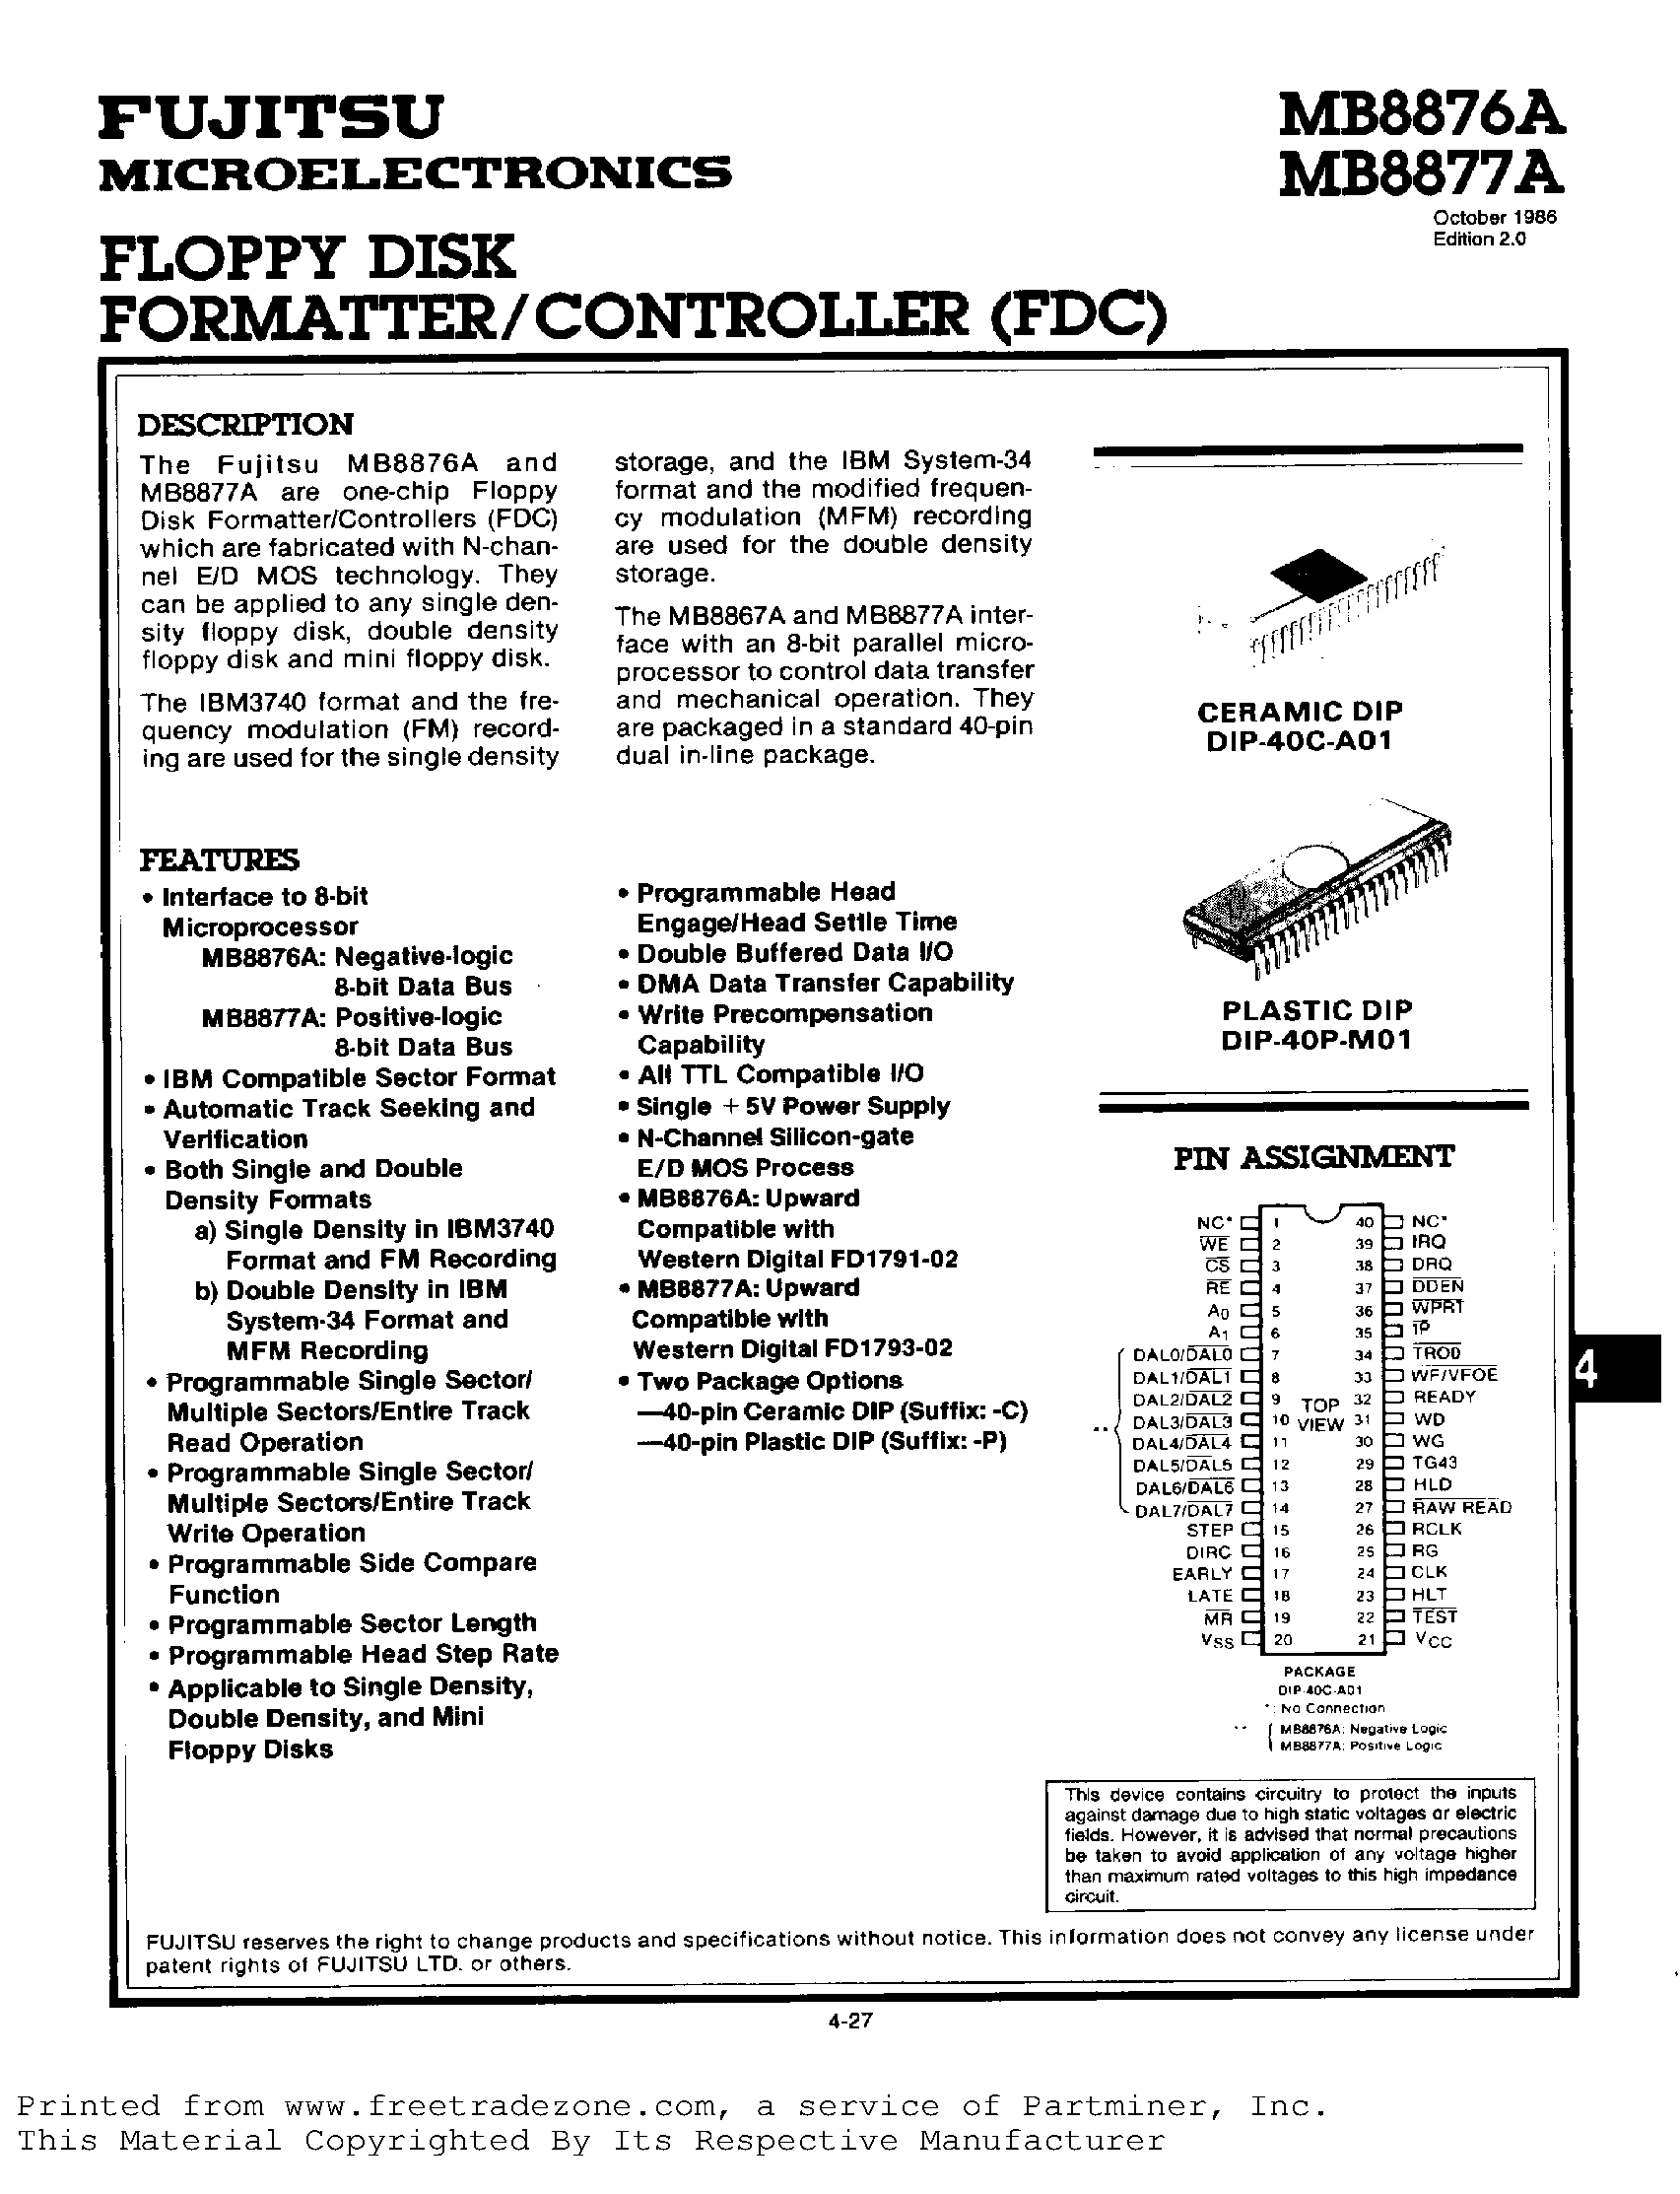 Datasheet MB8876A - (MB8876A / MB8877A) FLOPPY DISK FORMATTER / CONTROLLER (FDC) page 1